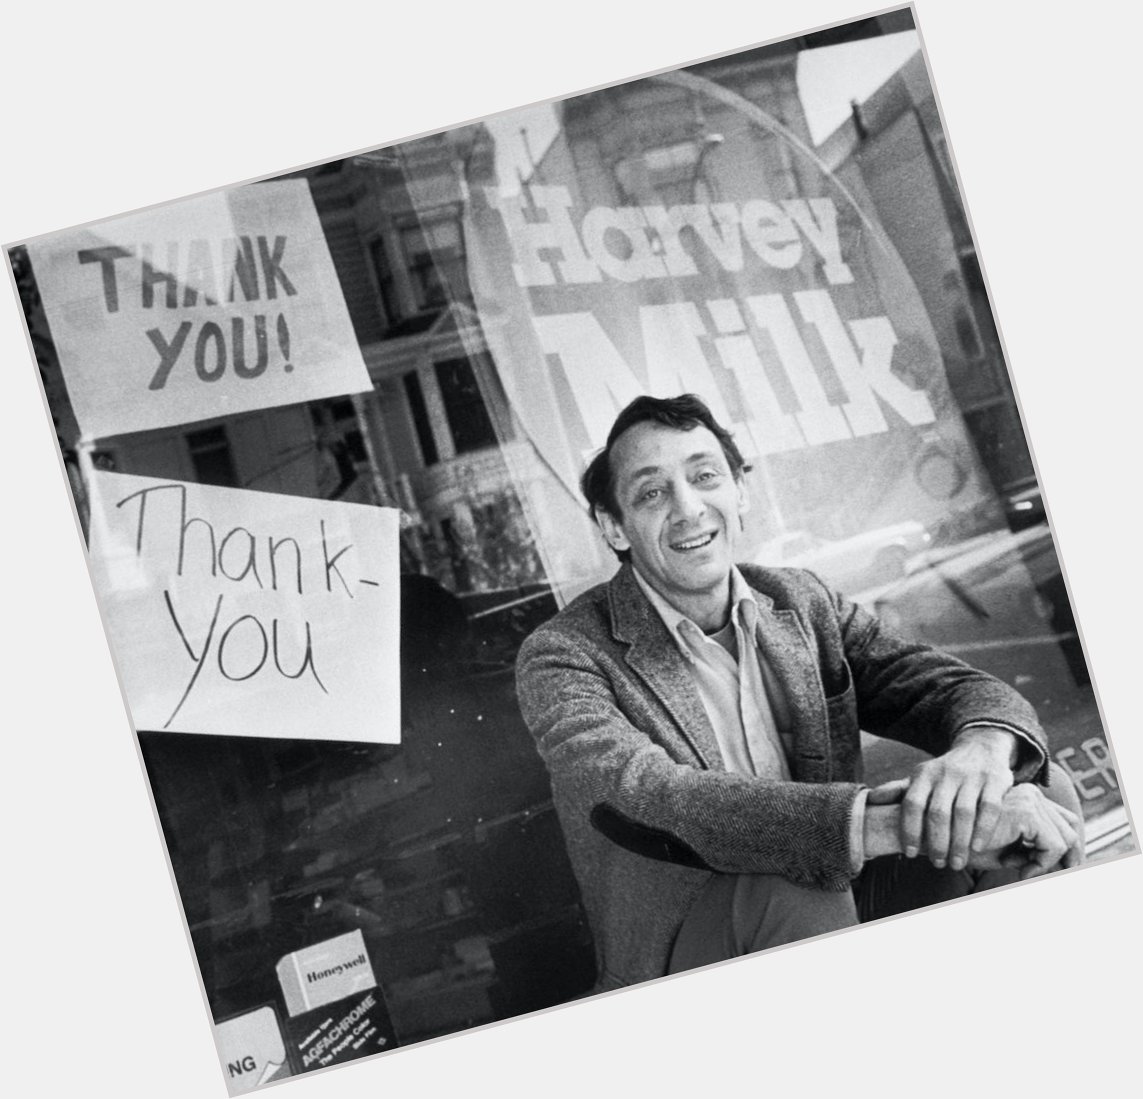 Happy birthday, Harvey Milk!  Rest in Power & Rest In Peace. We thank you and wish I could\ve met you! 